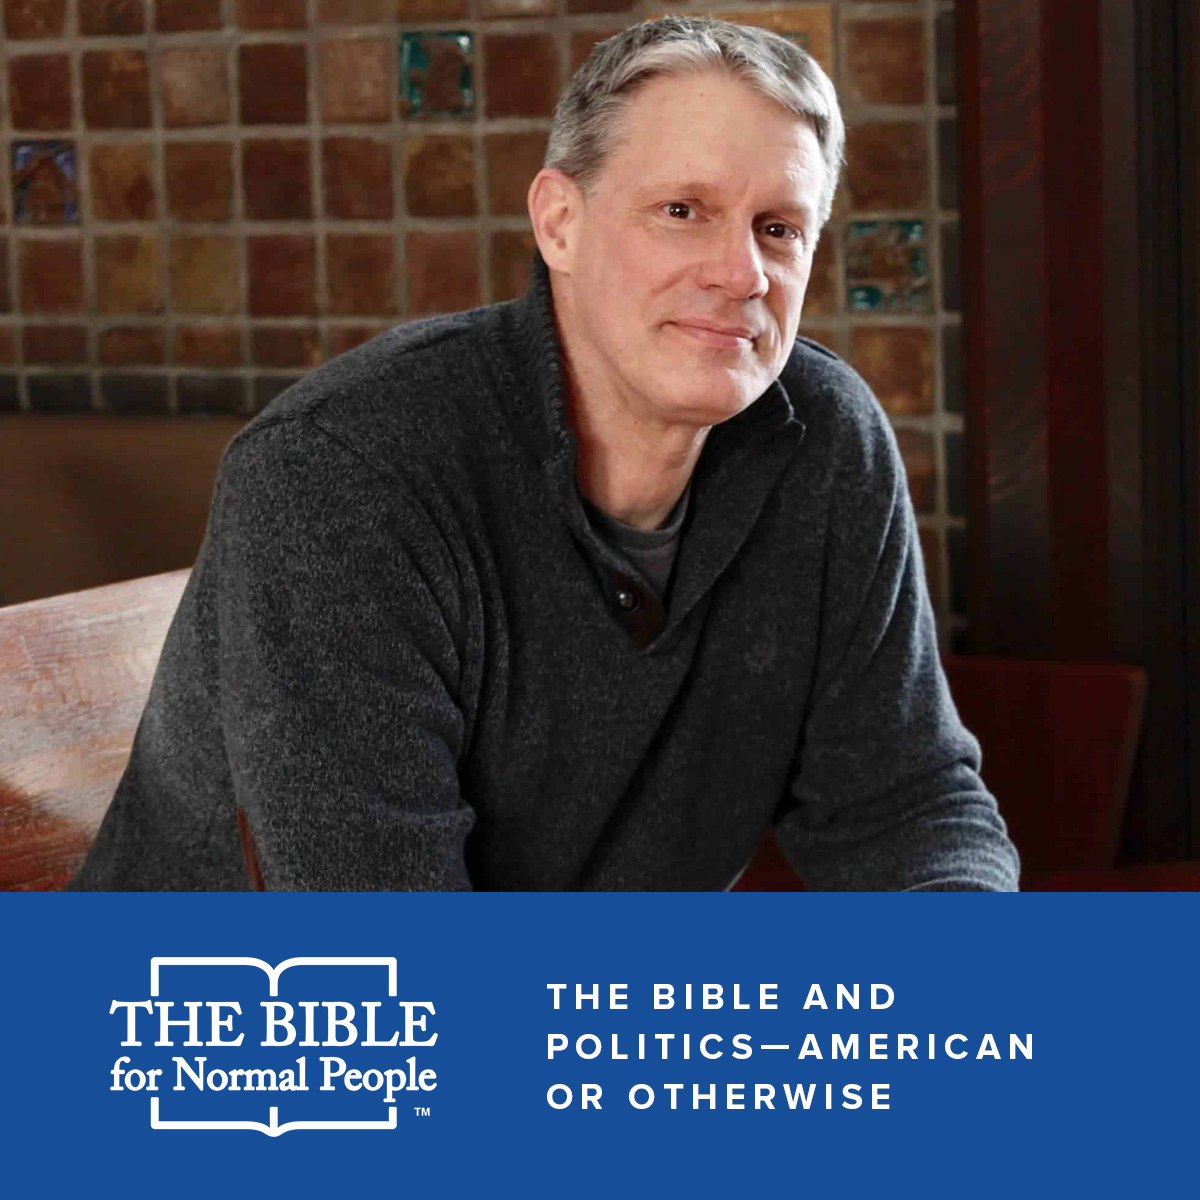 What Does the Bible Have To Say About Politics – American or Otherwise?